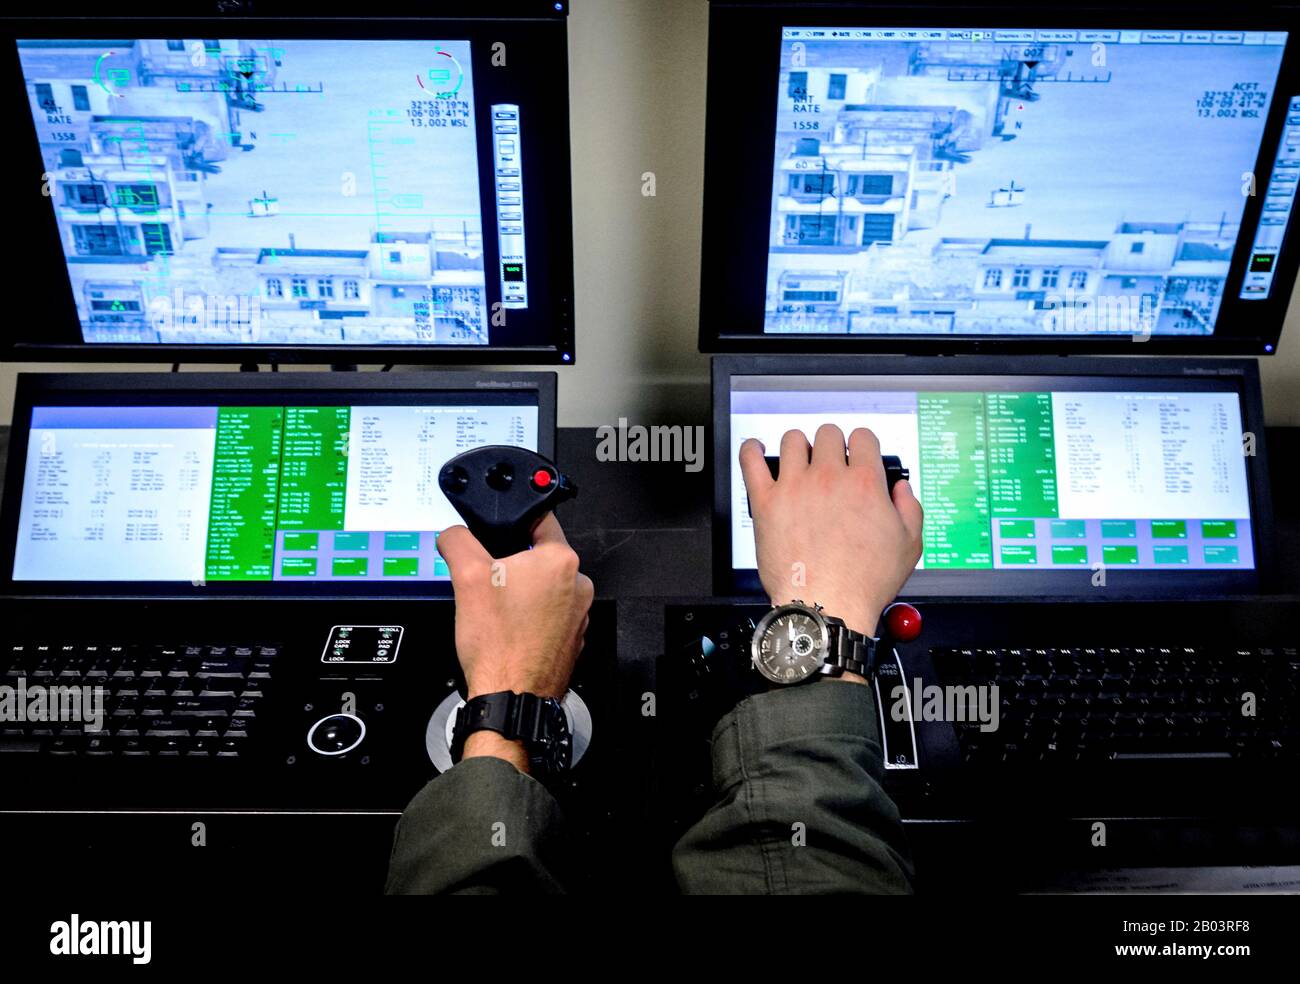 A U.S. Air Force student pilot operates controls during a Predator Reaper drone mission flight simulator at the 558th Flying Training Squadron, Joint Base San Antonio July 17, 2018 in San Antonio, Texas. Student pilots spend 85 days in the RPA Instrument Qualification course and 30 days in the RPA Fundamentals Course during the second phase of the Air Education and Training Command pilot curriculum. Stock Photo